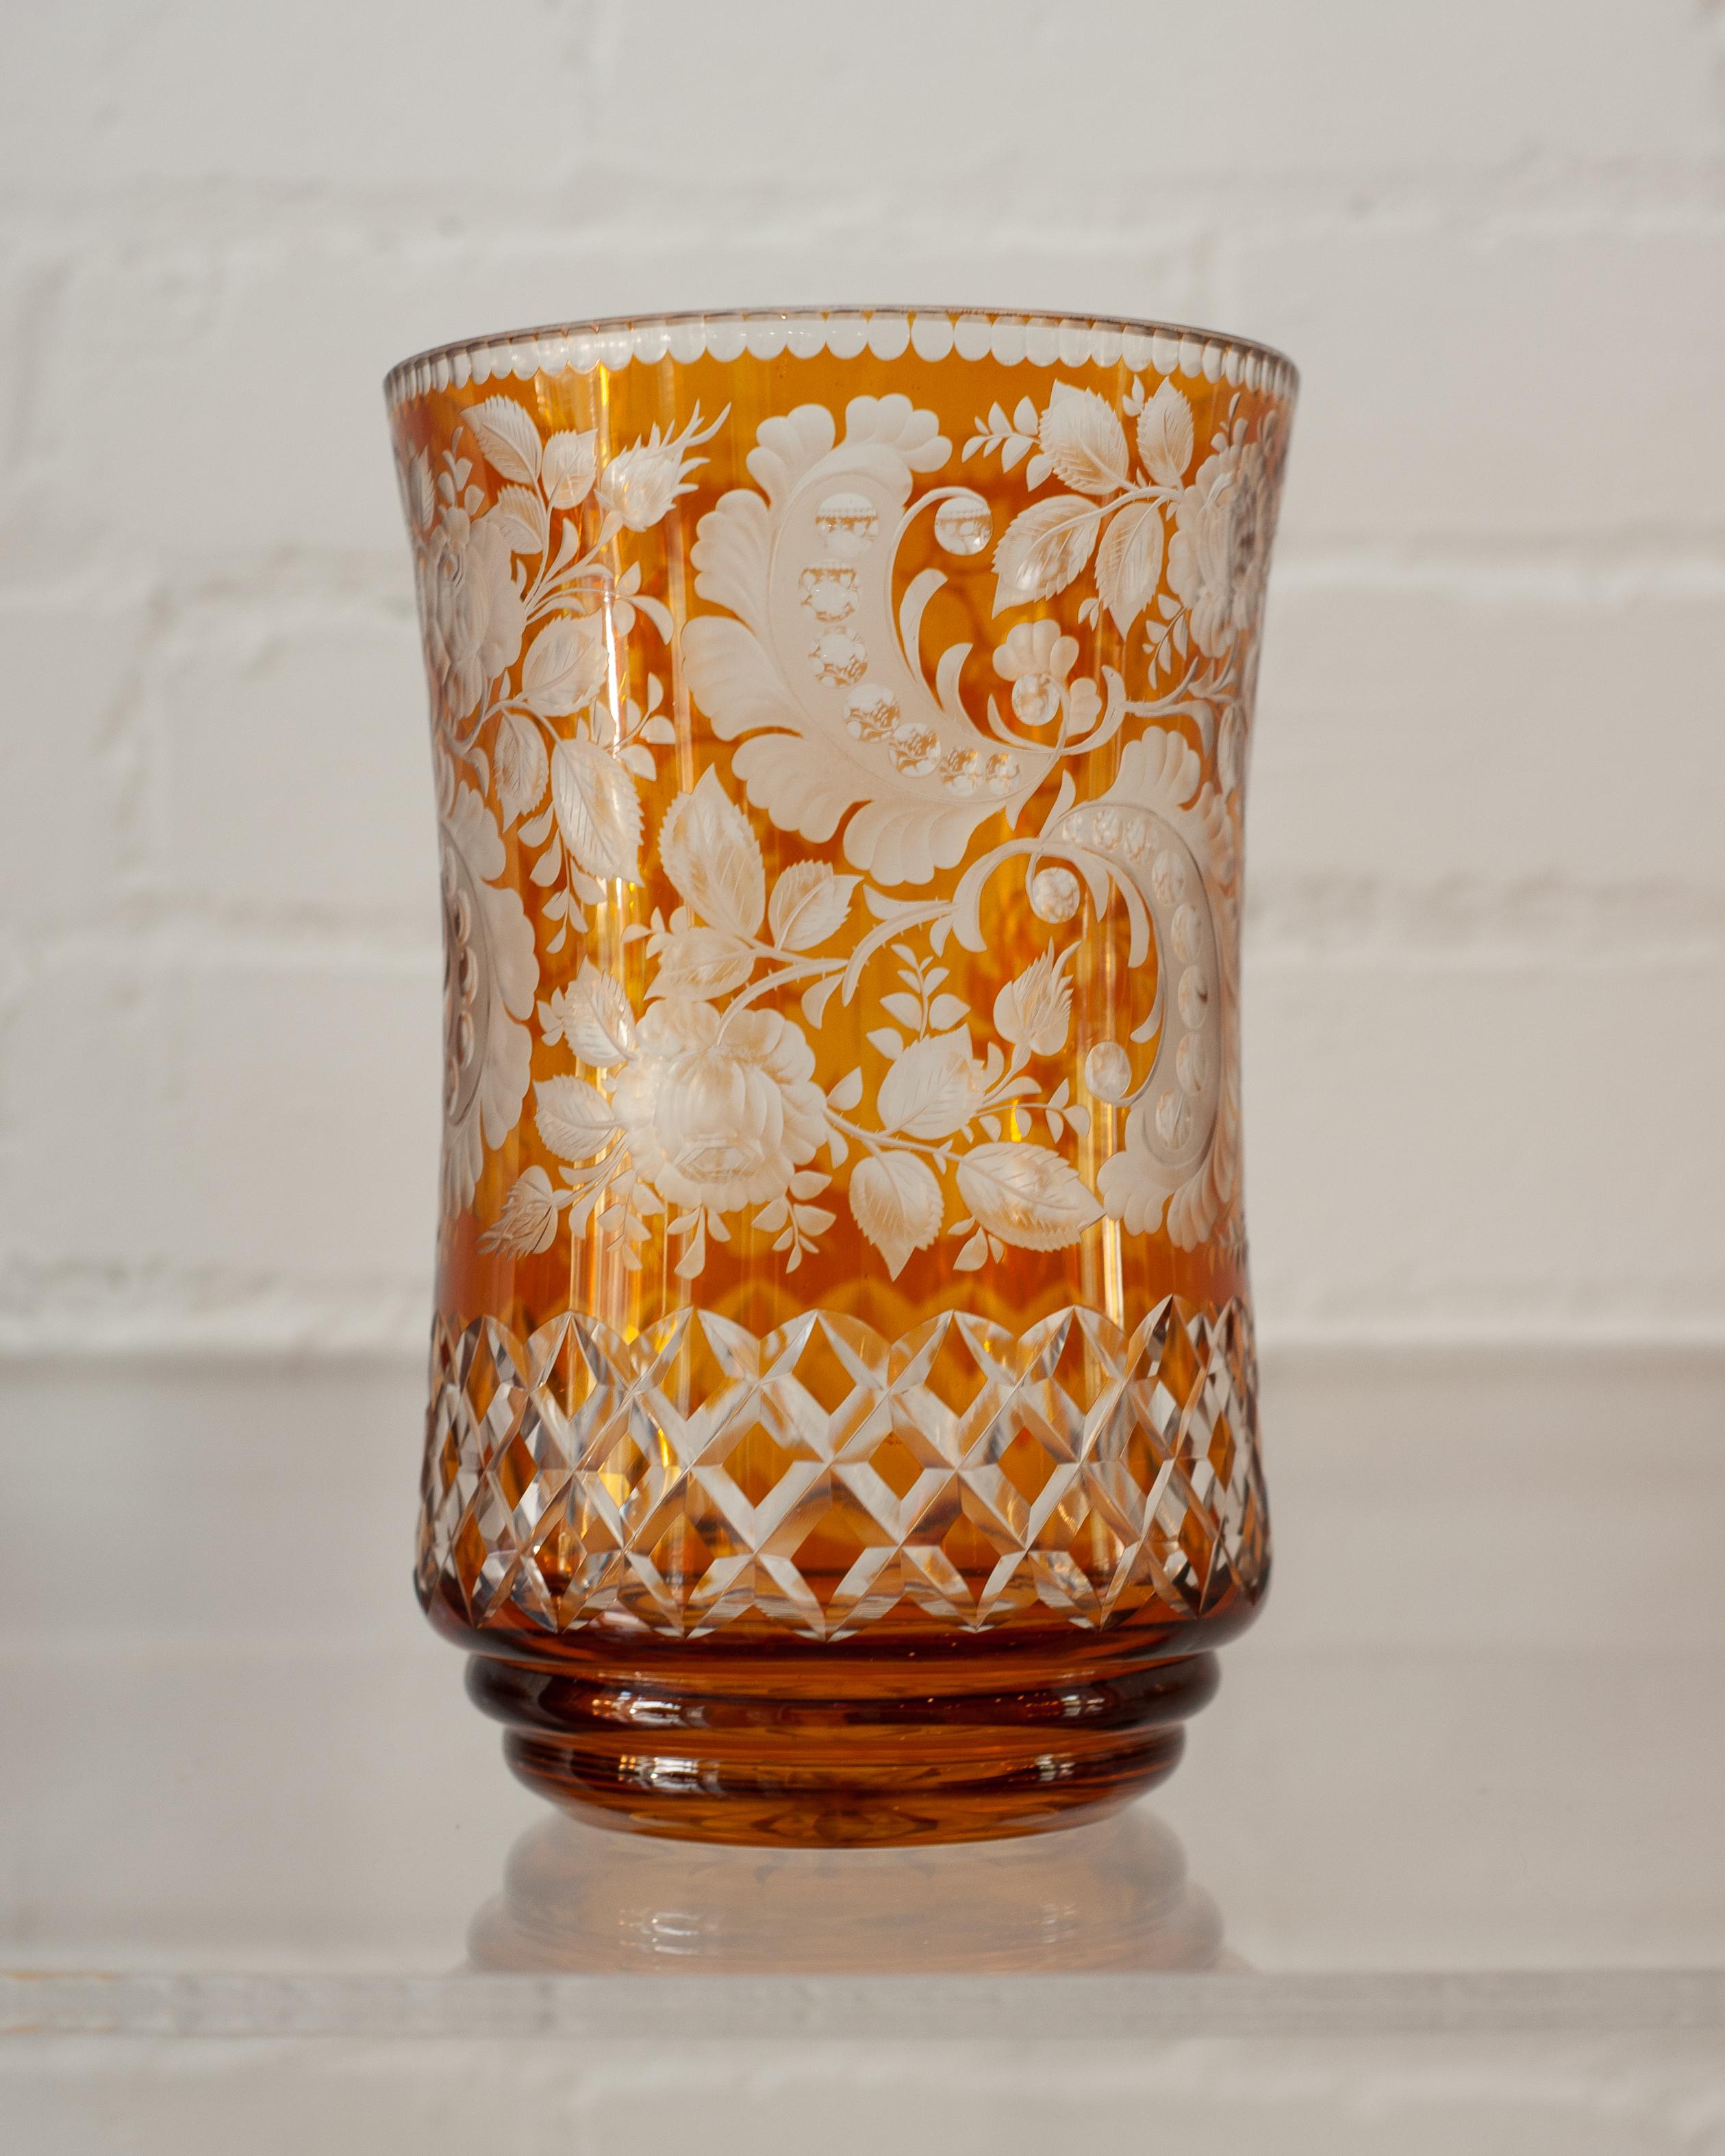 A large Antique Bohemian amber glass vase with cut crystal ornate floral and cross hatch patterns. The artistry of the cut crystal makes this vessel as beautiful as the flowers you may put in them.